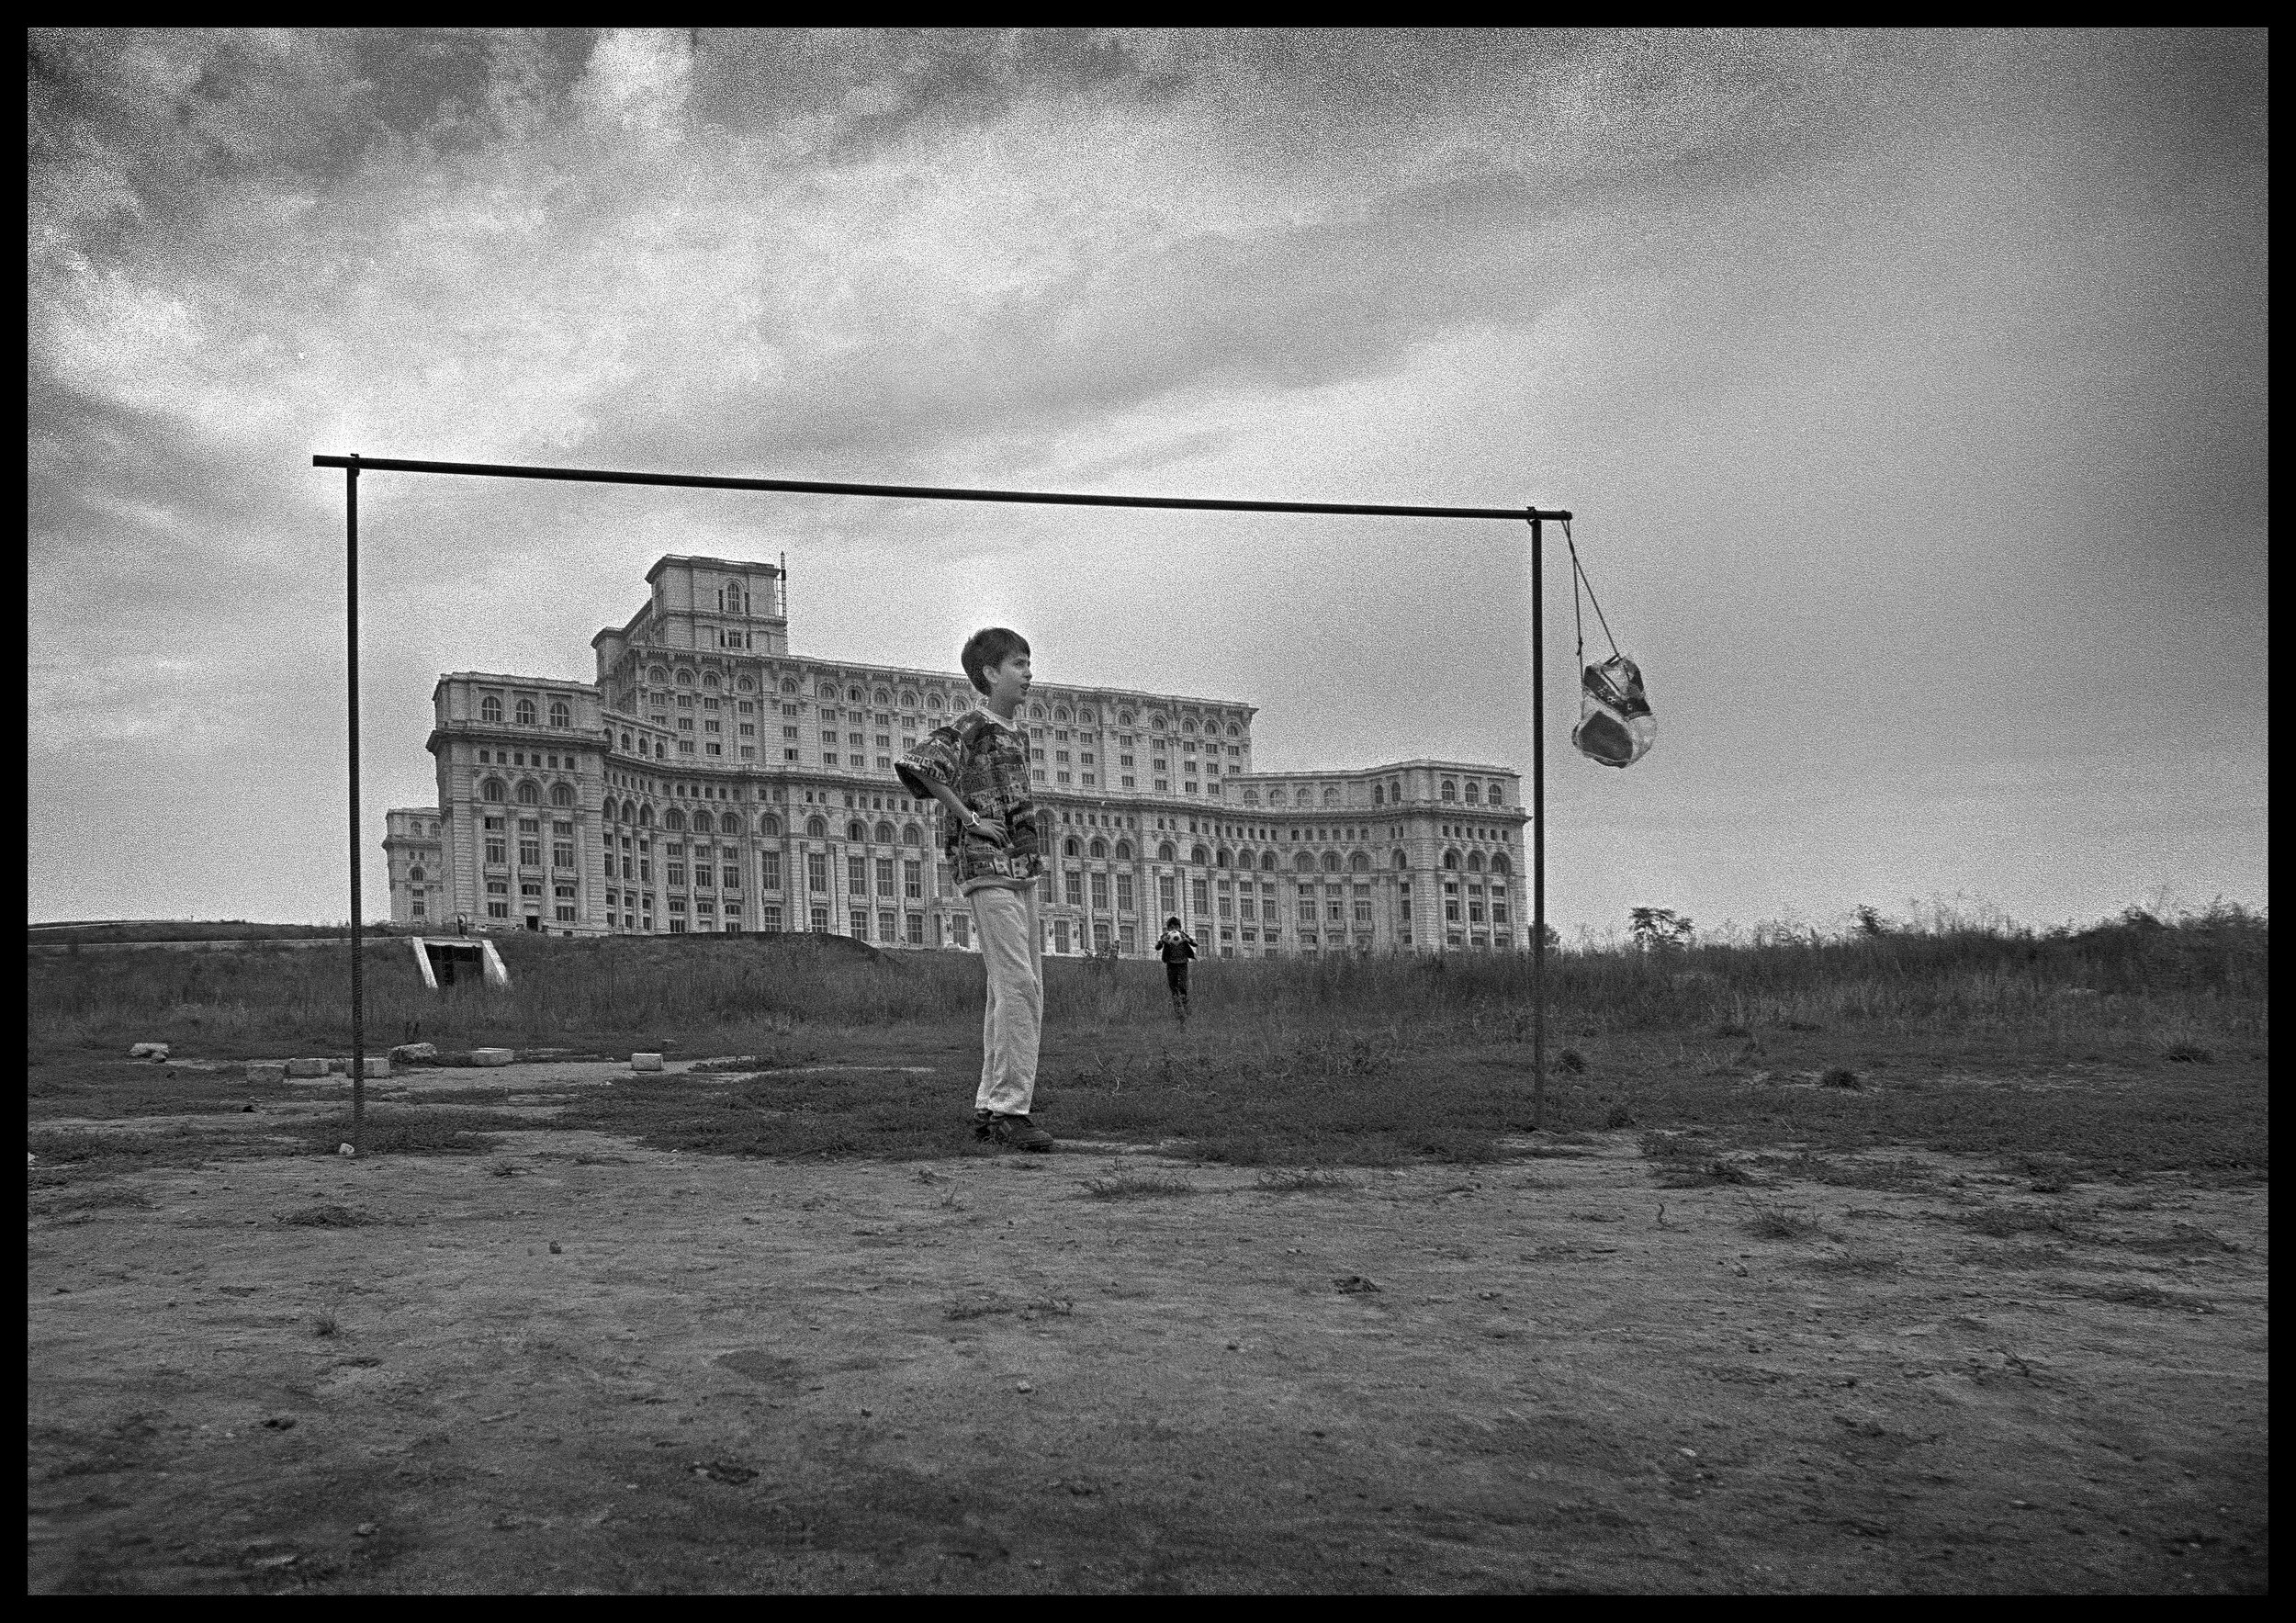 Football on waste ground behind Ceausescu's palace, Bucharest,Romania